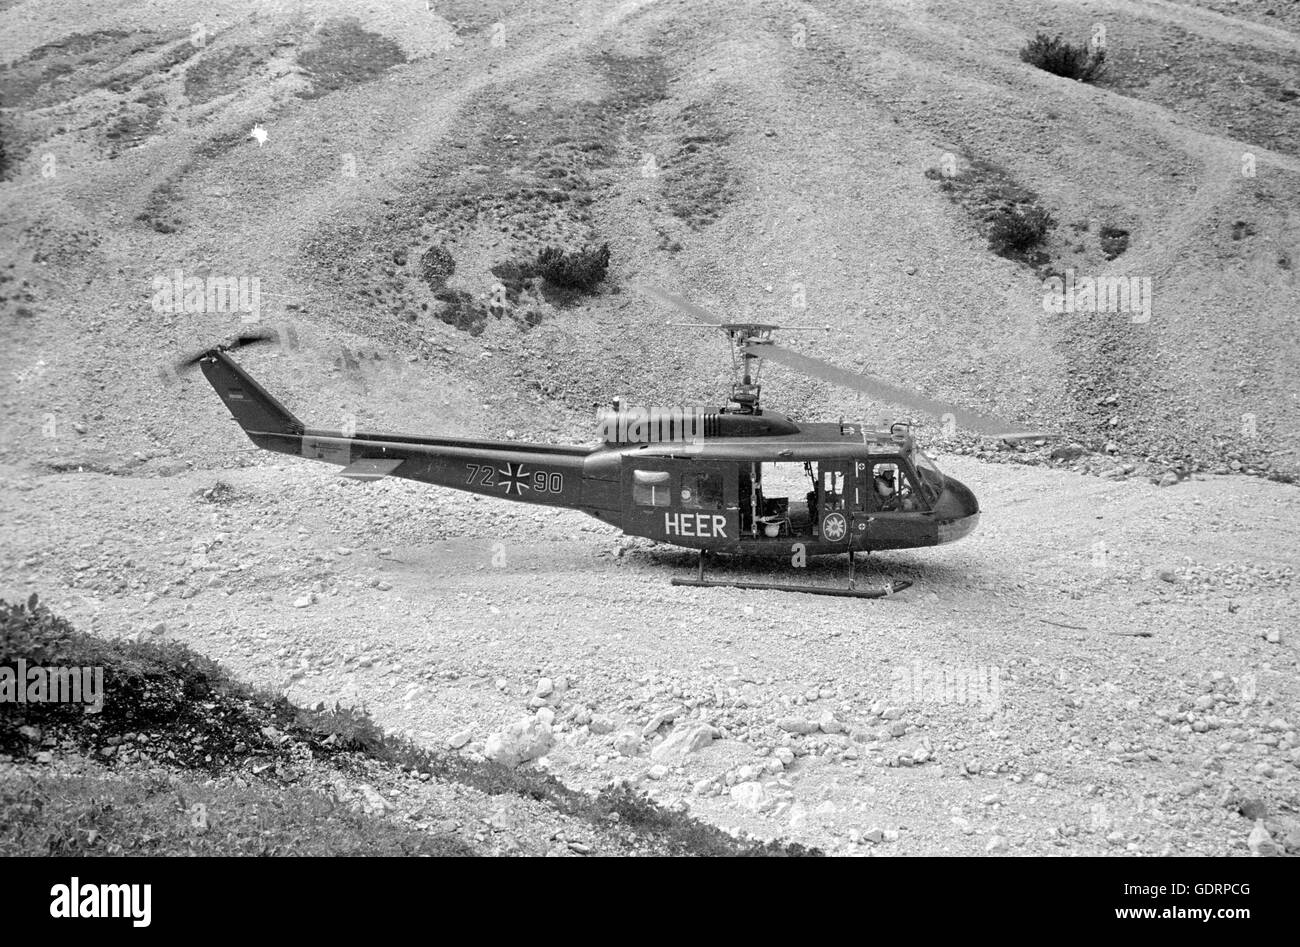 Rescue helicopter of the type Bell UH-1D in action, 1970 Stock Photo